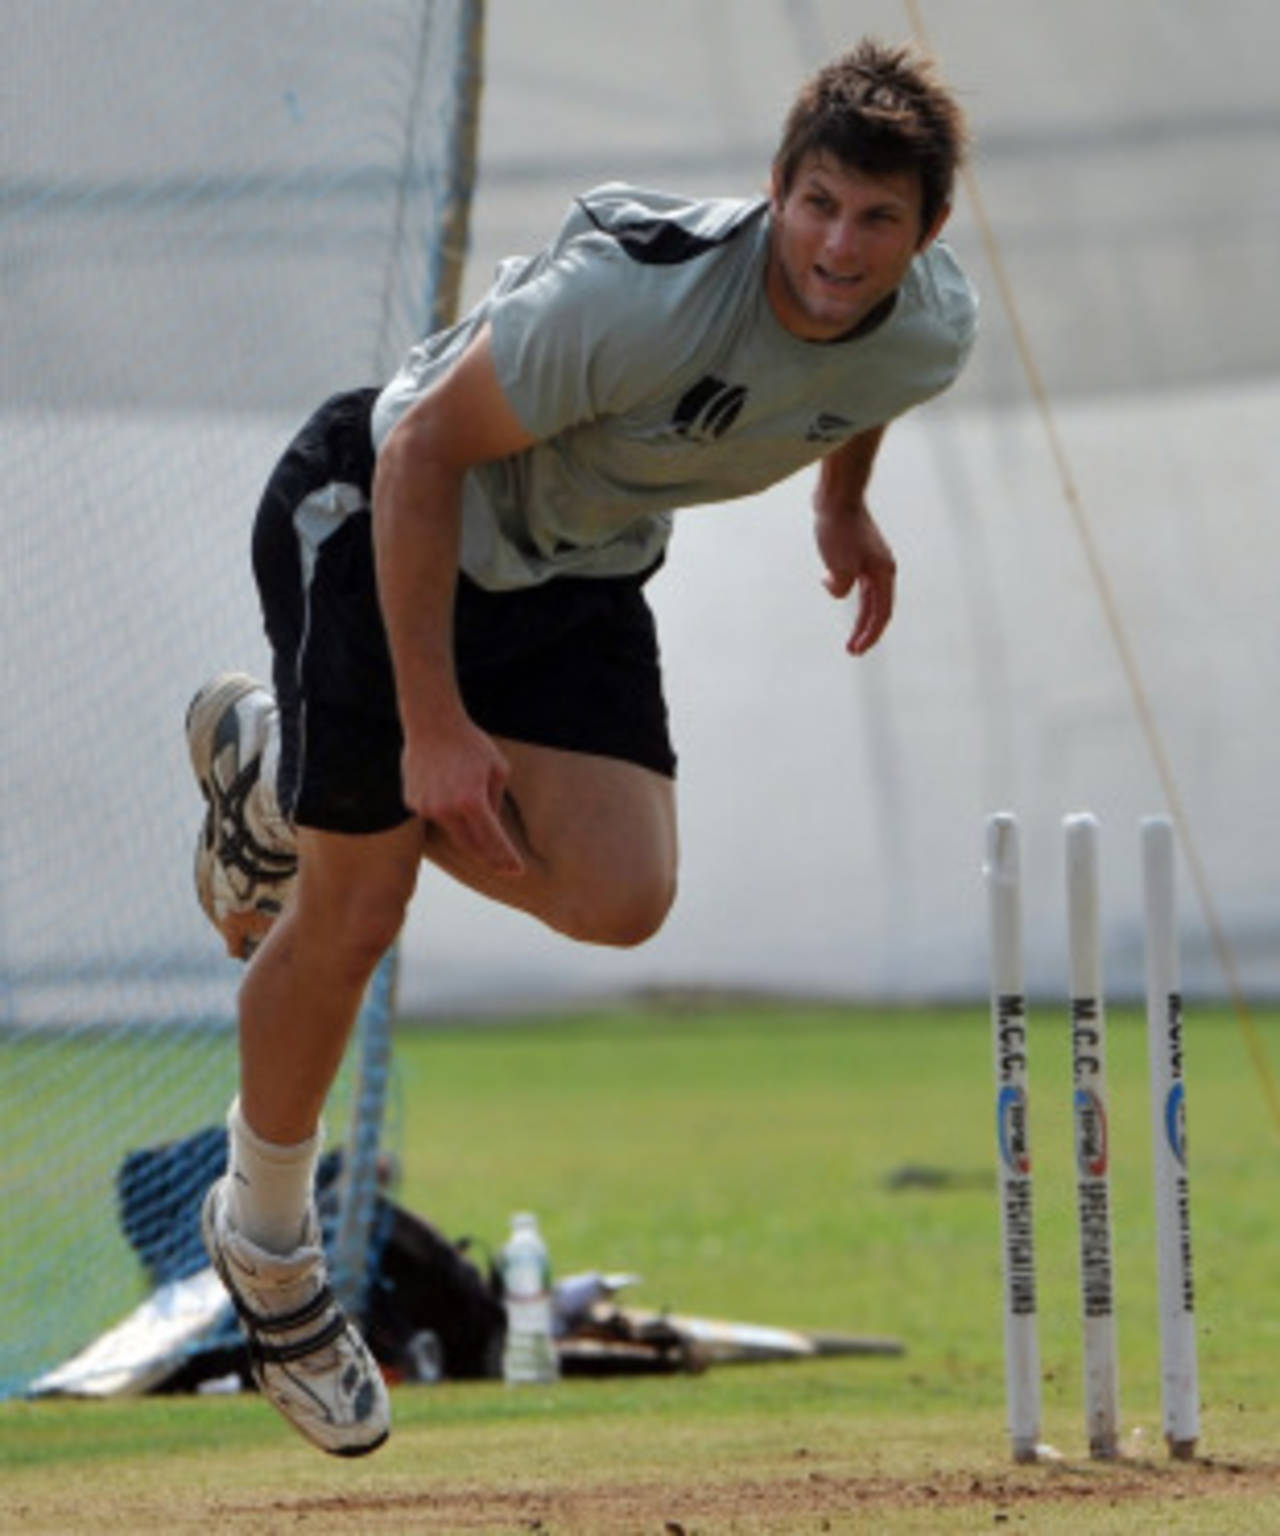 Hamish Bennett sweats it out at a training session, Ahmedabad, November 2, 2010